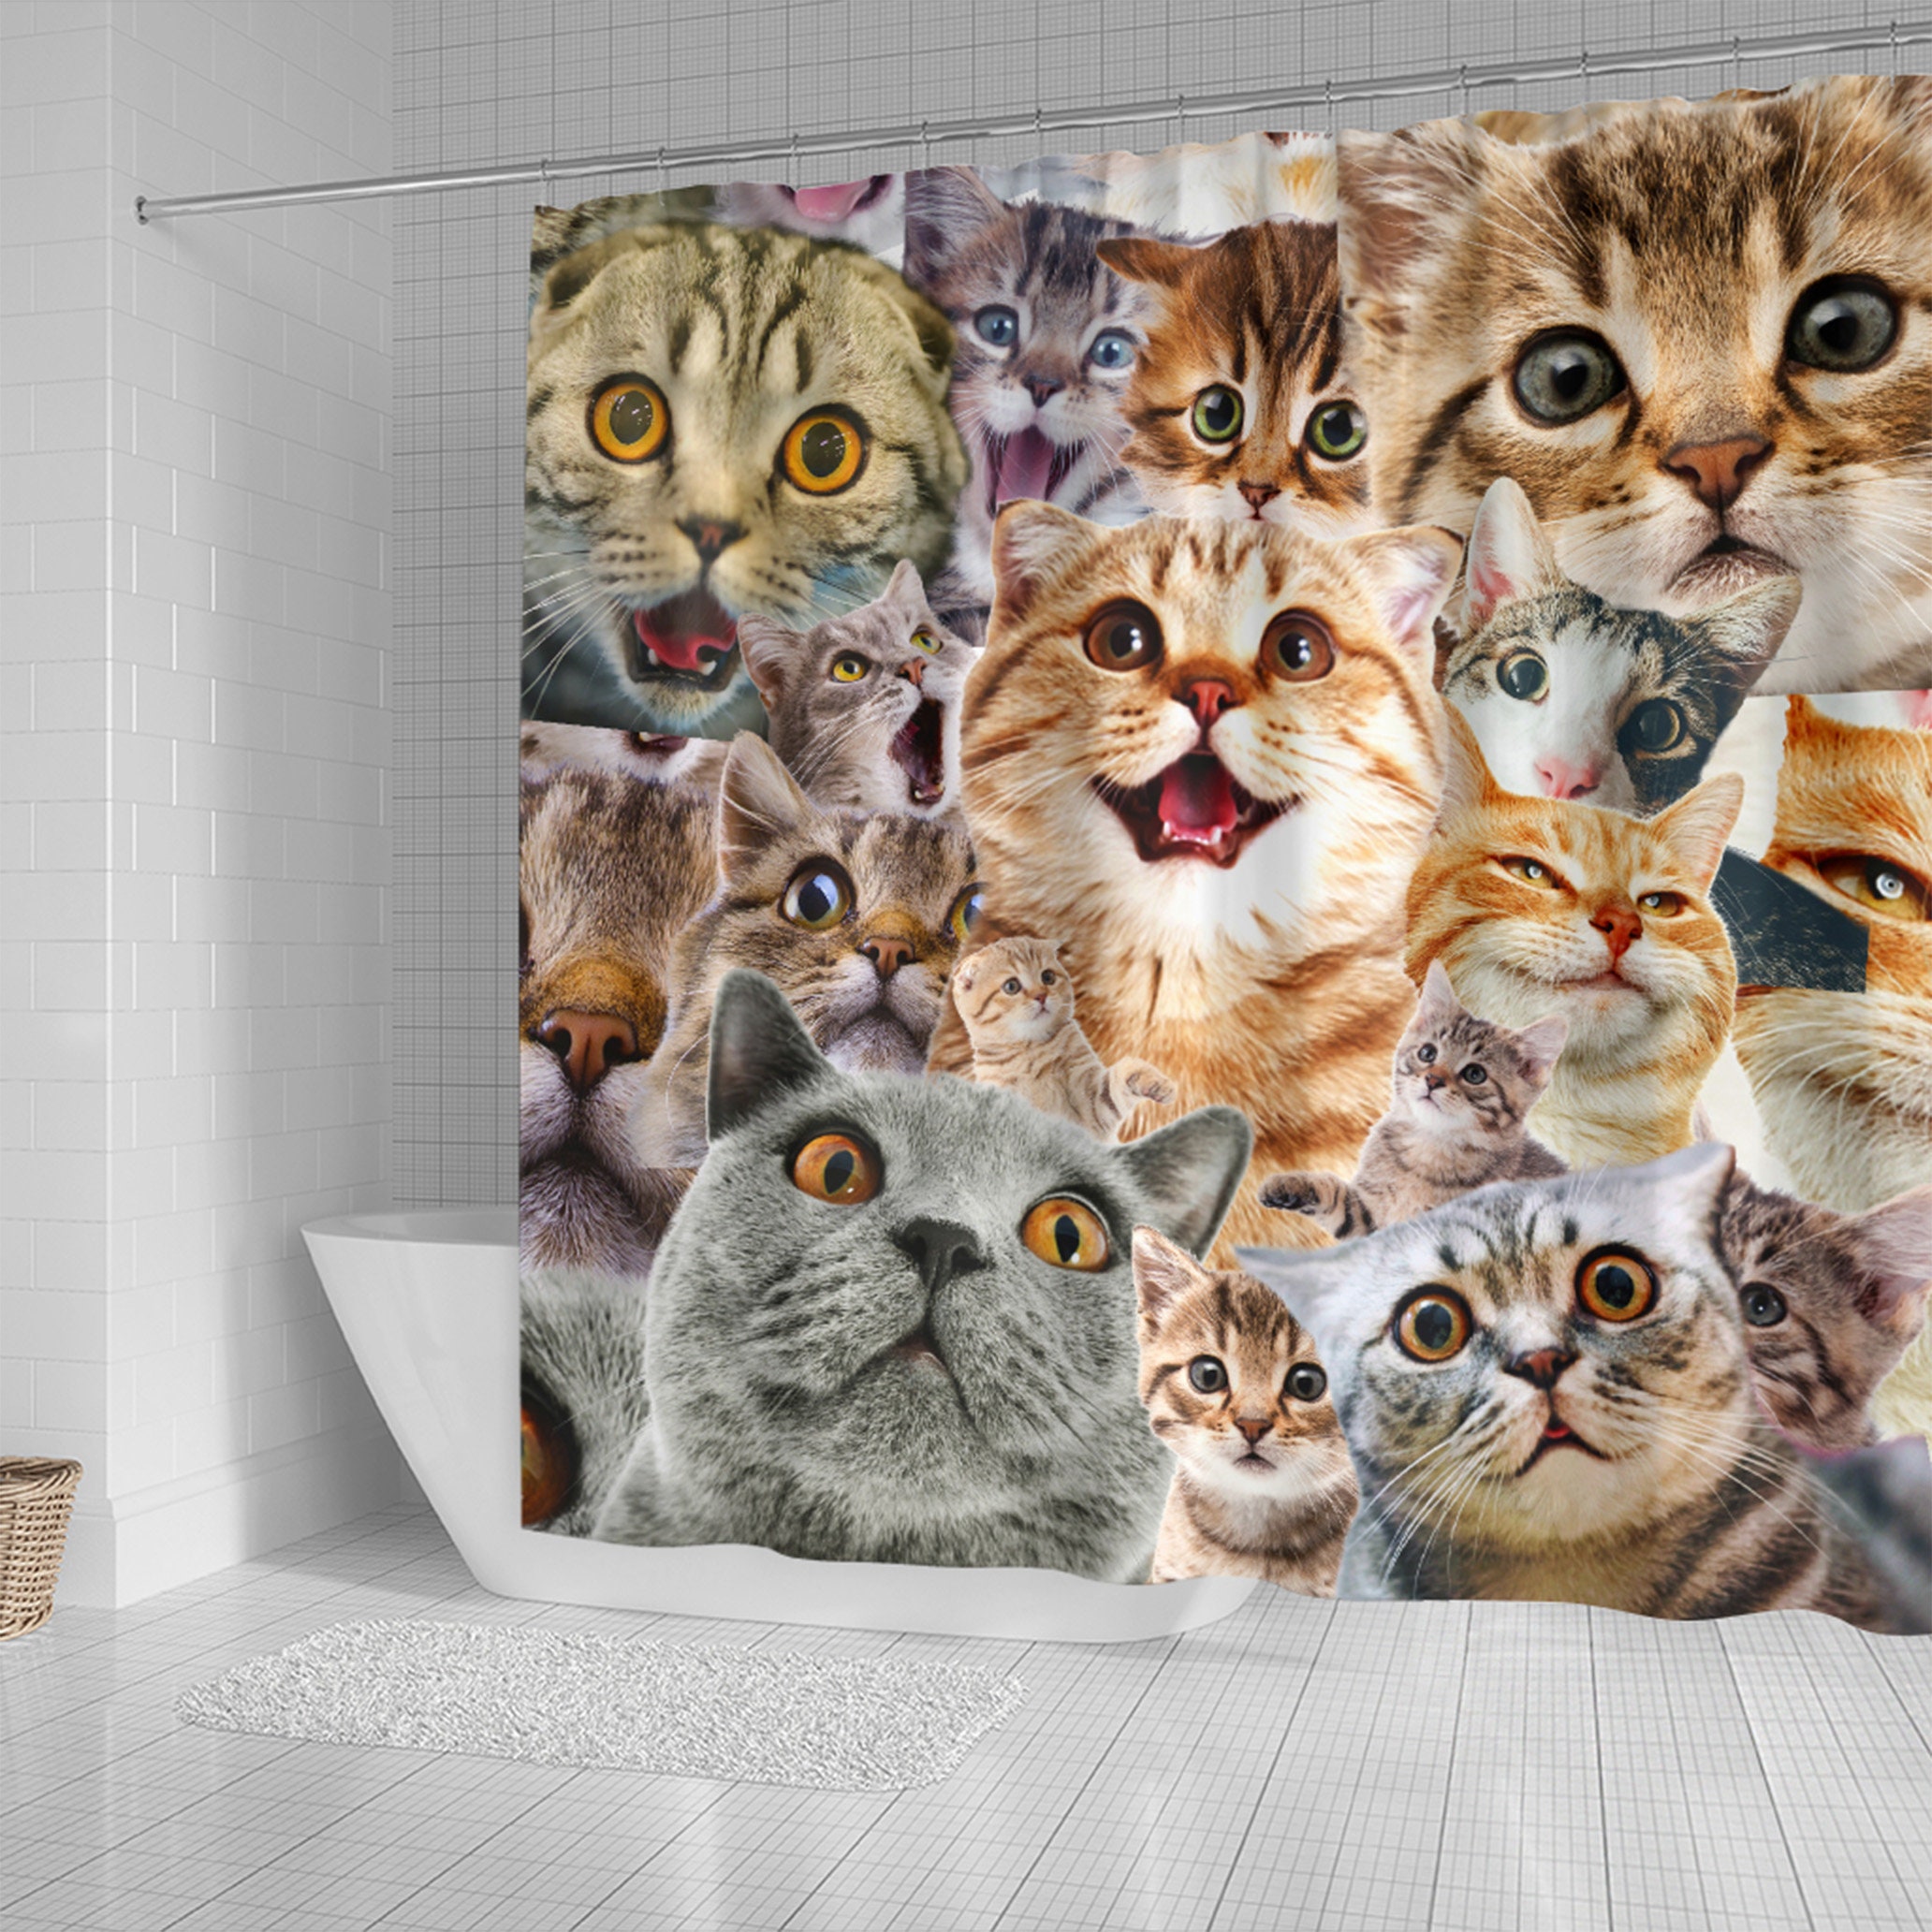 Cute Cats Cool Shower Curtain, Bathroom Accessories Gifts idea Animal Home Decor